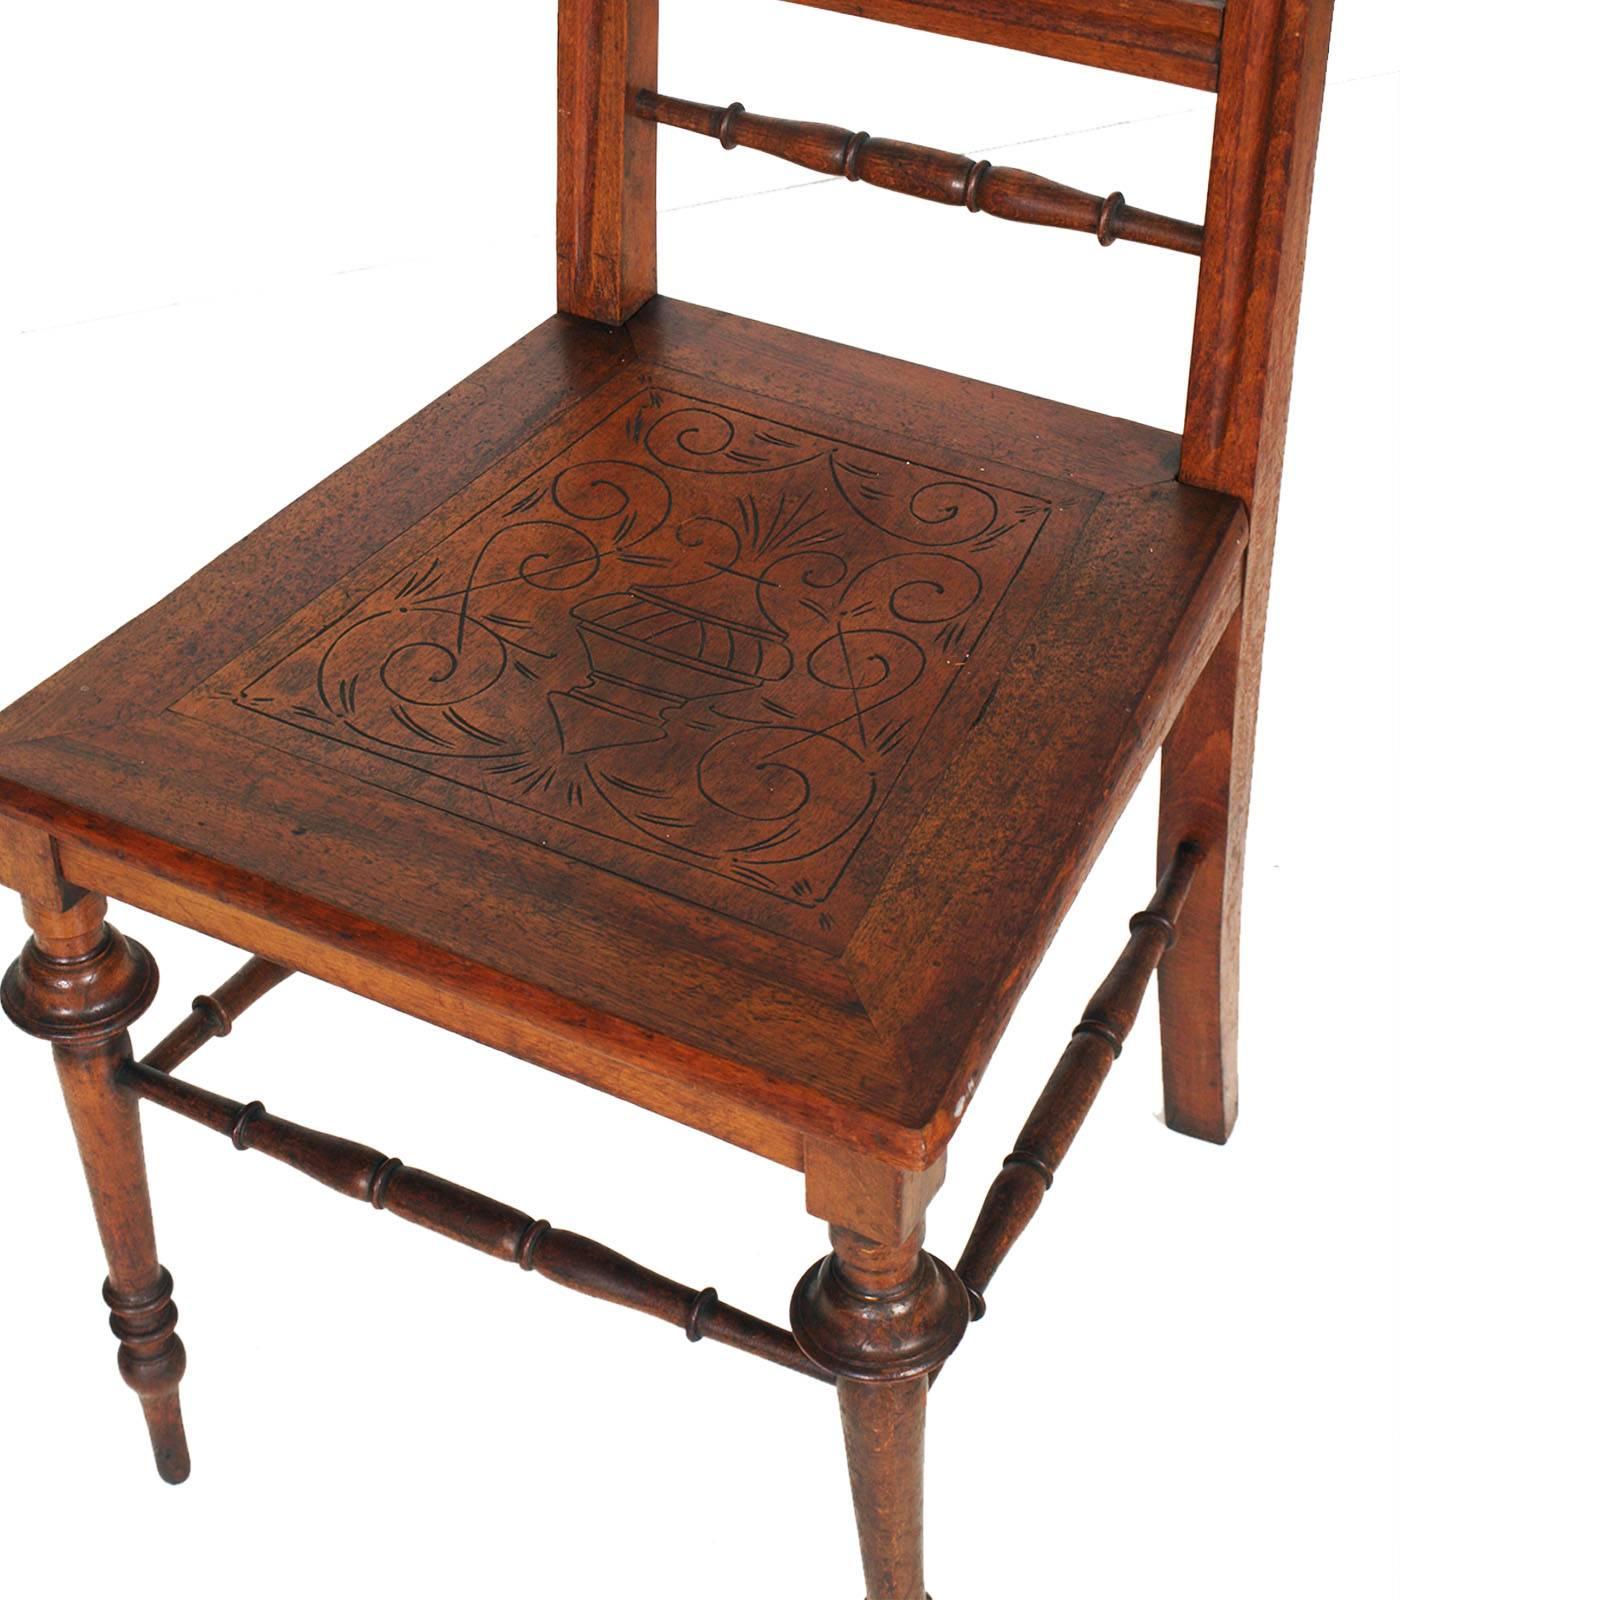 Elegant Mid-19th century Chiavarine side chairs in turned walnut and with hand-carved seat, restored and finished to wax

Measure cm: H 101\47 x W 45 x D 45.